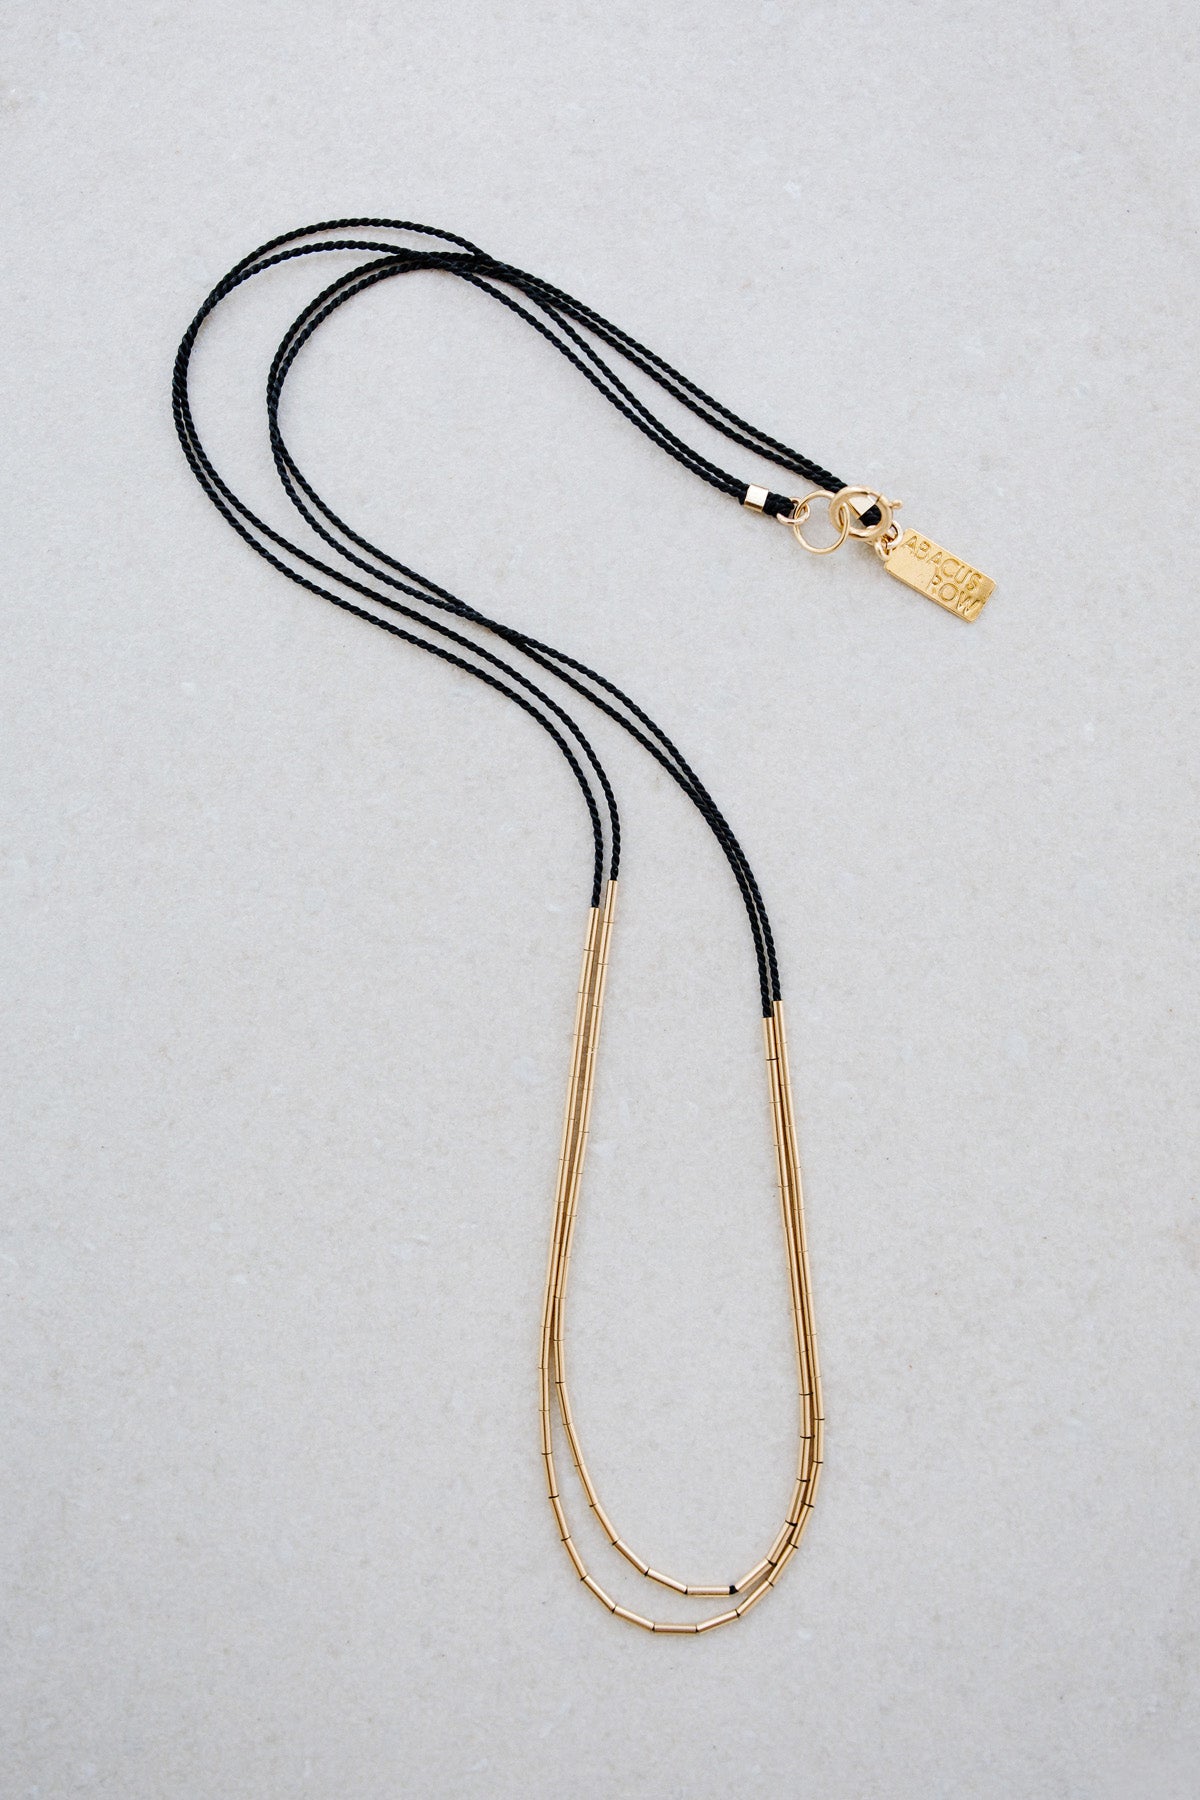 The Andromeda Necklace handmade in San Fransisco, California by Abacus Row features 14k gold tubes strung on two black silk cords